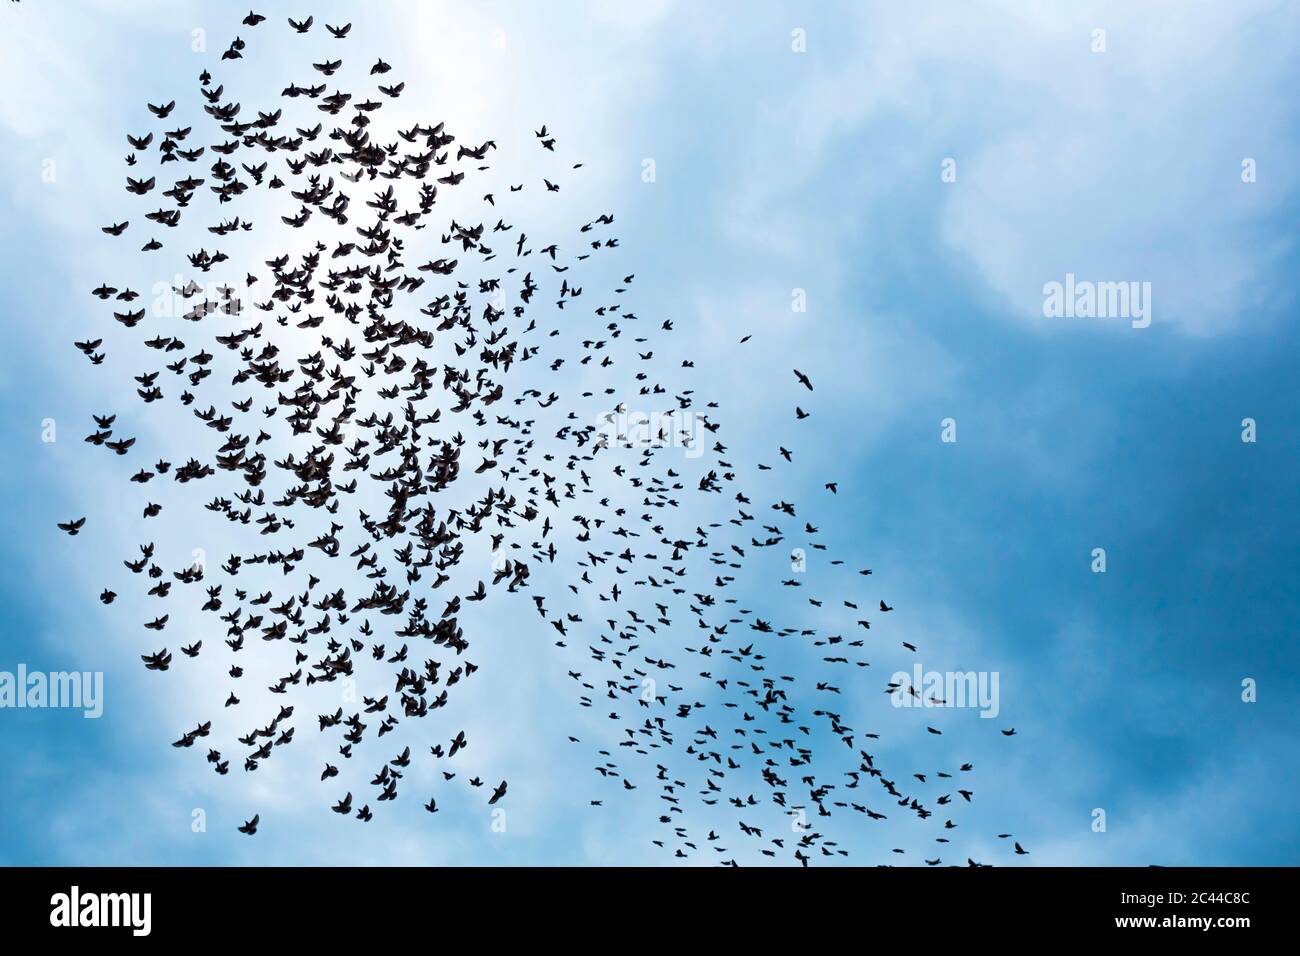 Georgia, Low angle view of flock of birds flying against sky Stock Photo